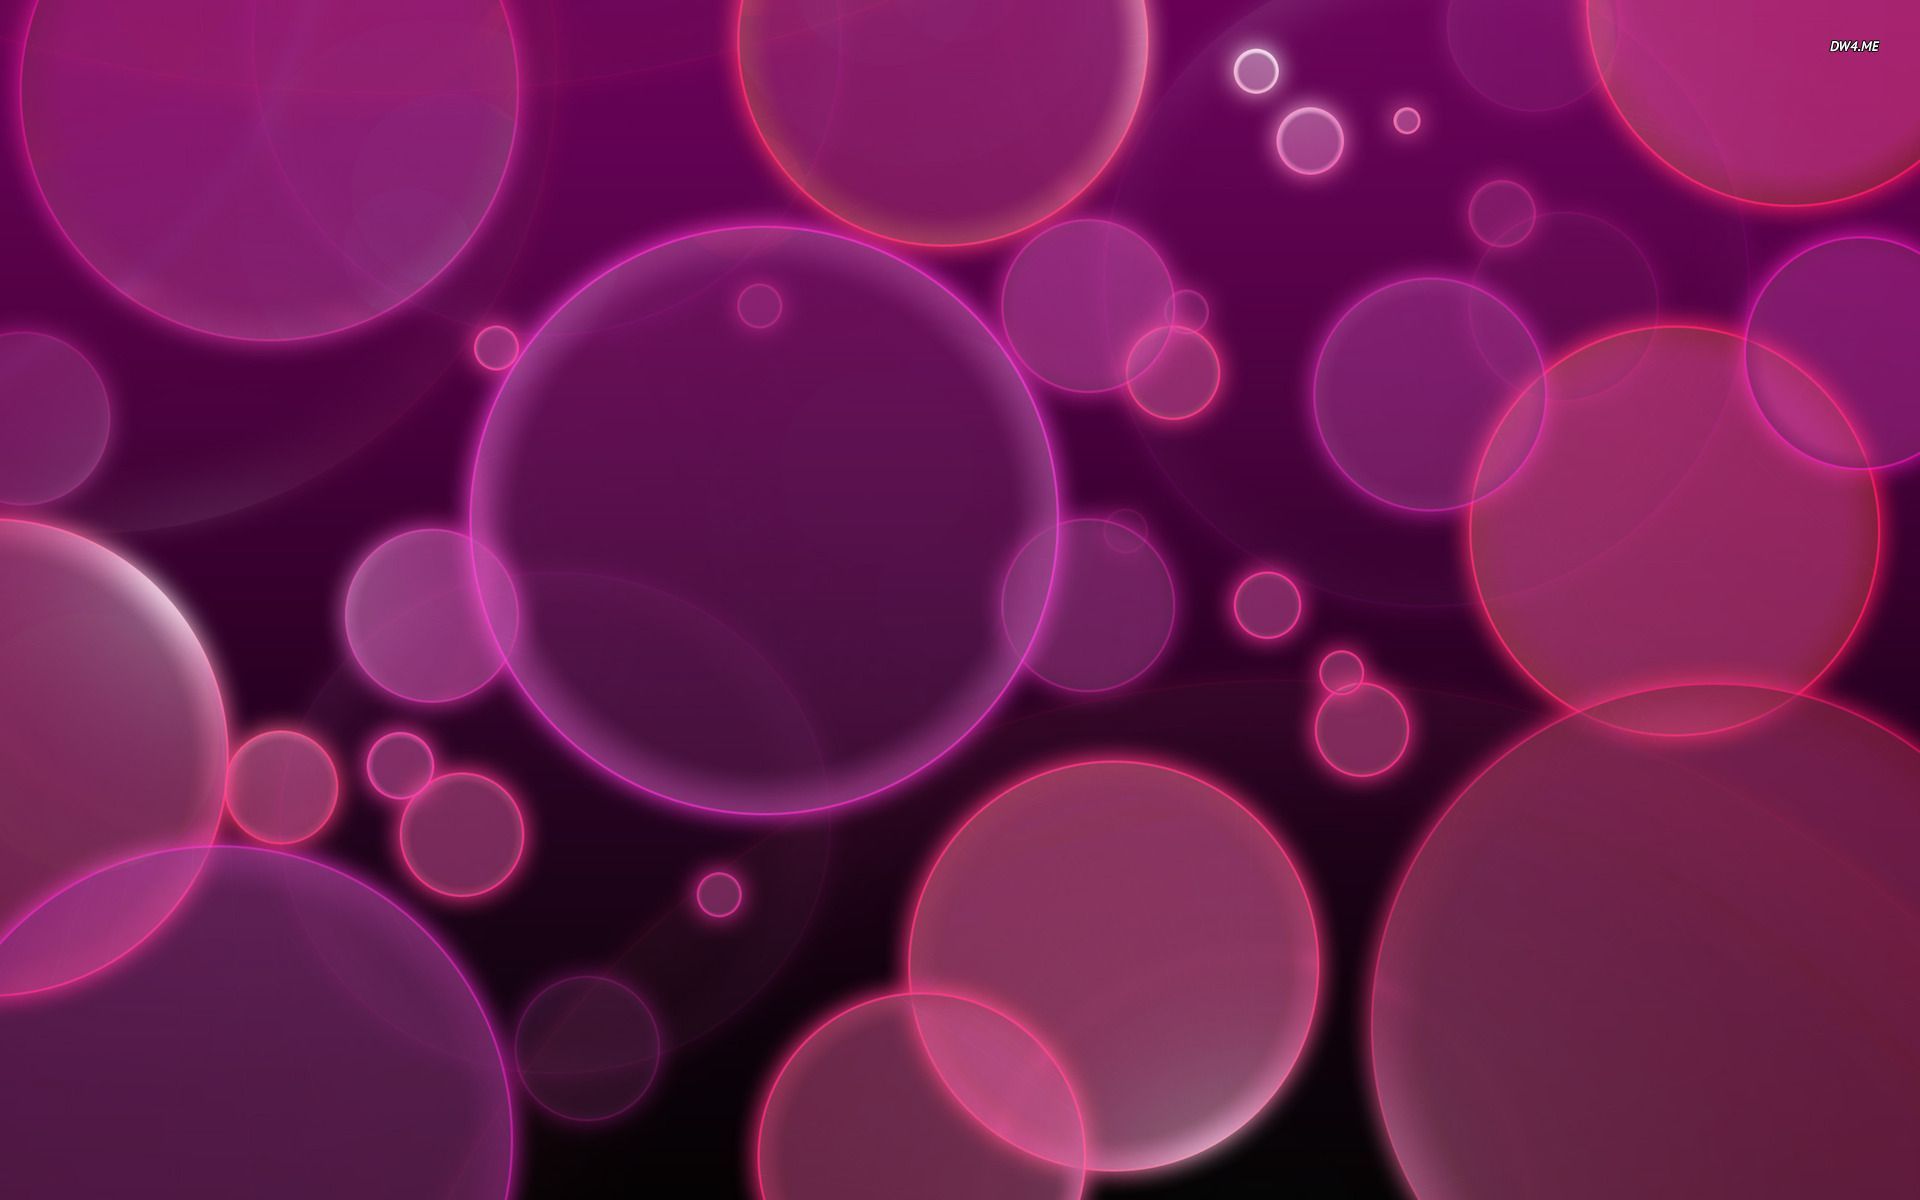 Preview Pink Bubble Image By Darshana Jankovic - Purple Bubbles Background - HD Wallpaper 